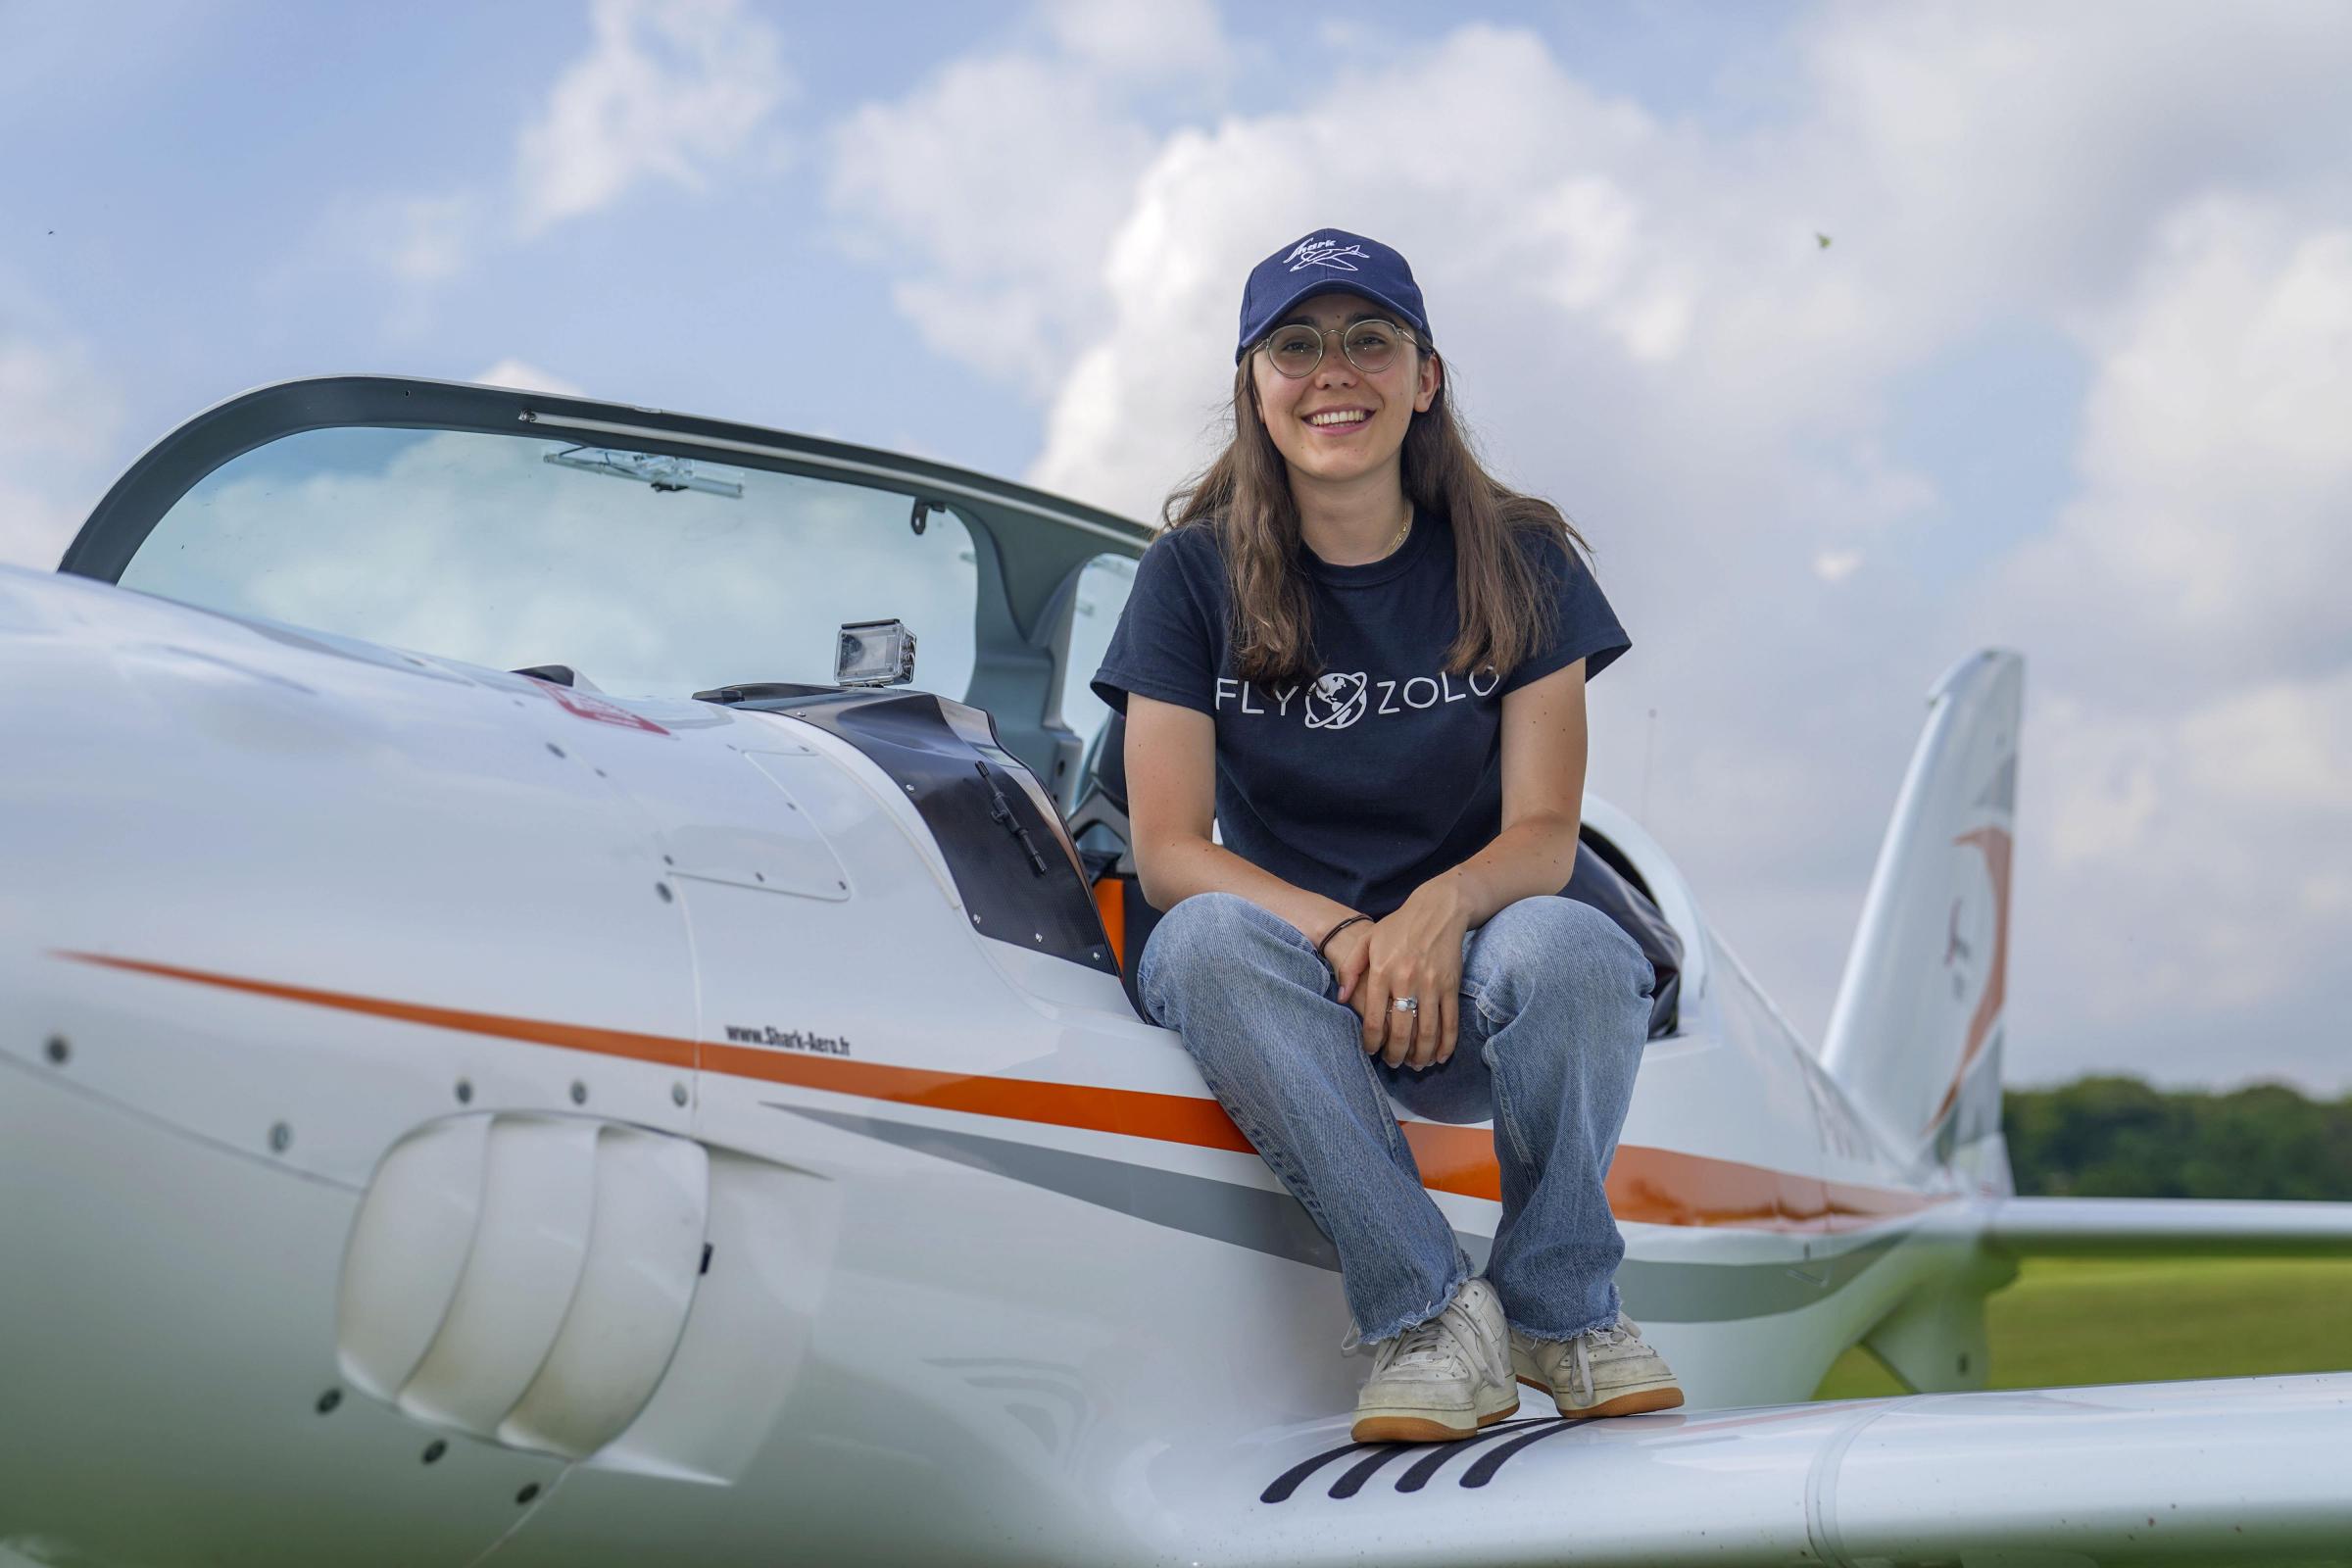 British Teen completes solo round the world flight